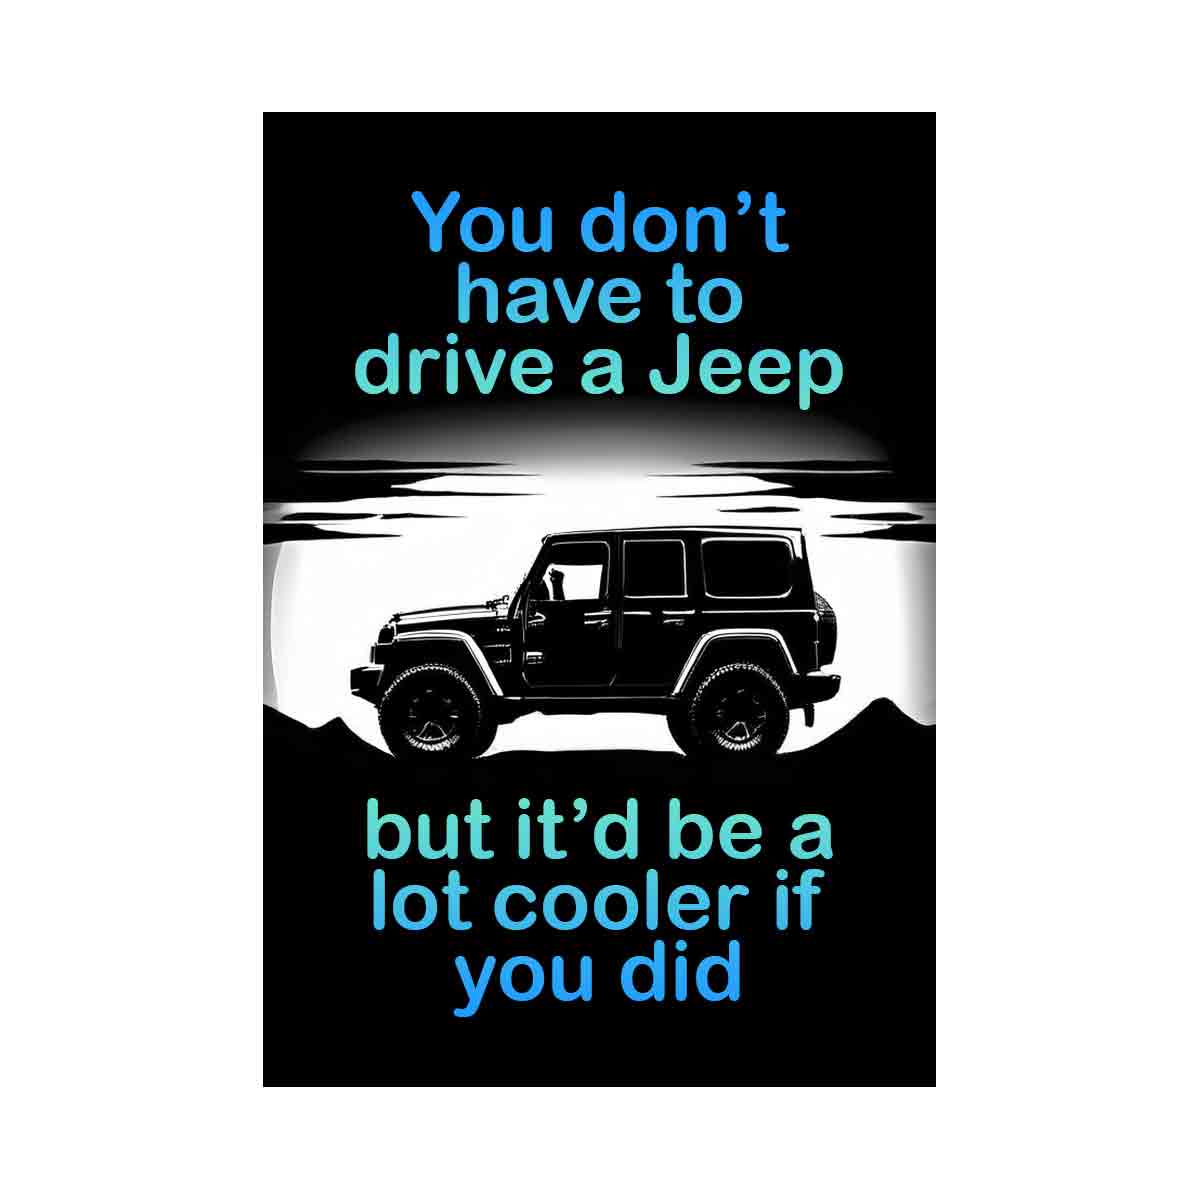 You don't have to Drive a Jeep